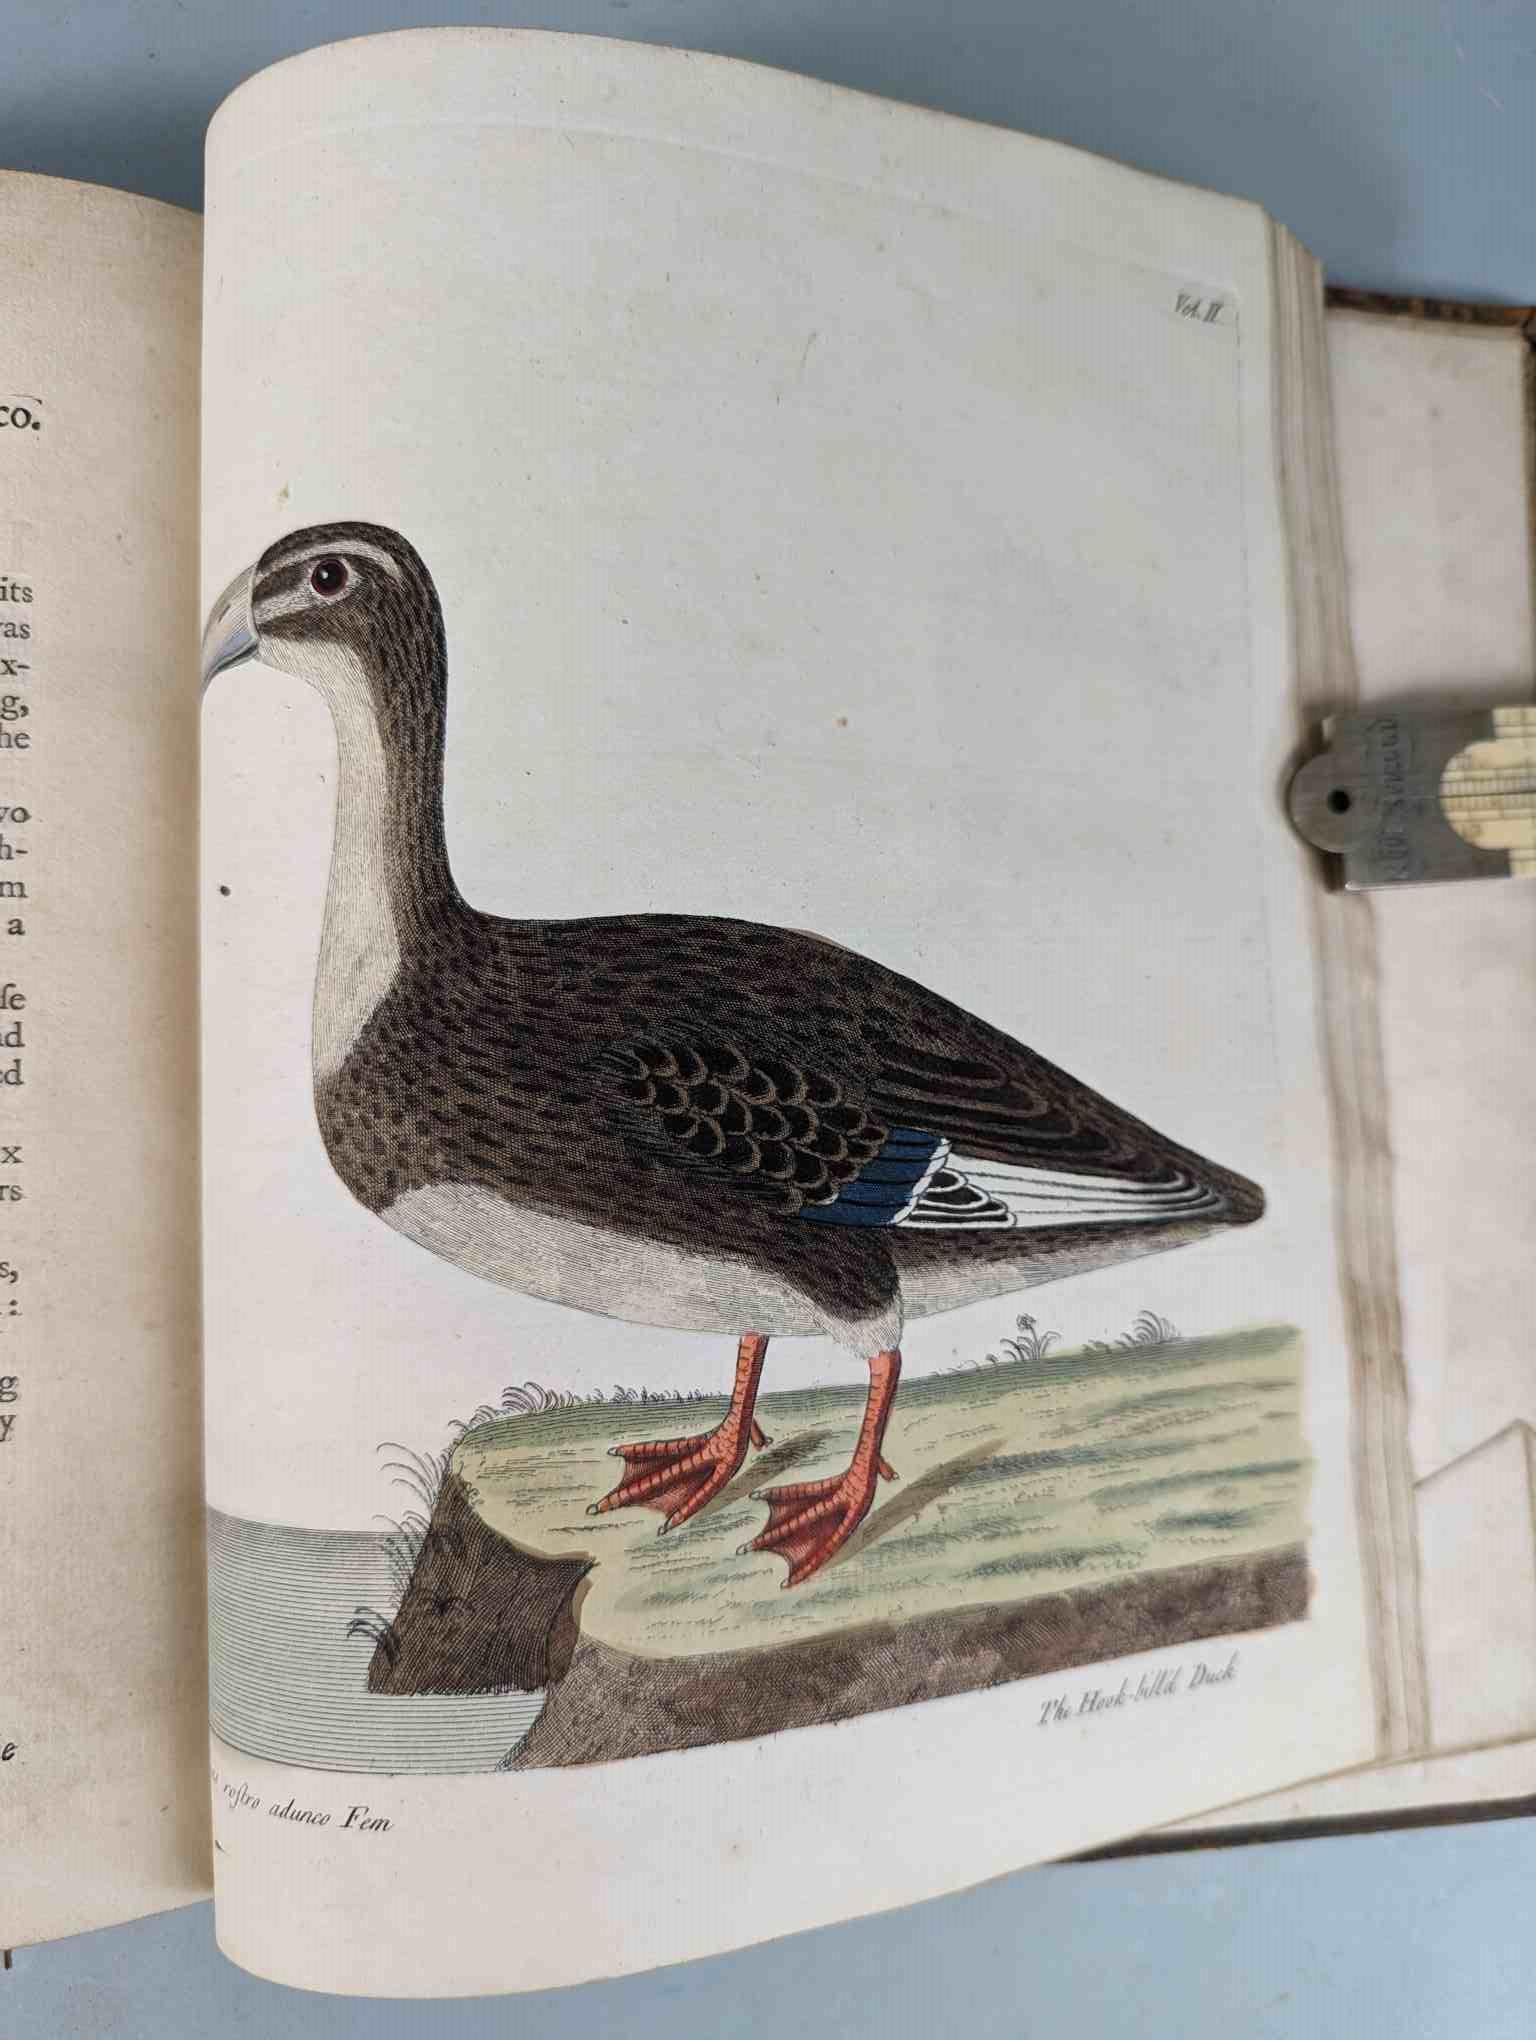 ALBIN, Eleazar. A Natural History of Birds, to which are added, Notes and Observations by W. - Image 200 of 208